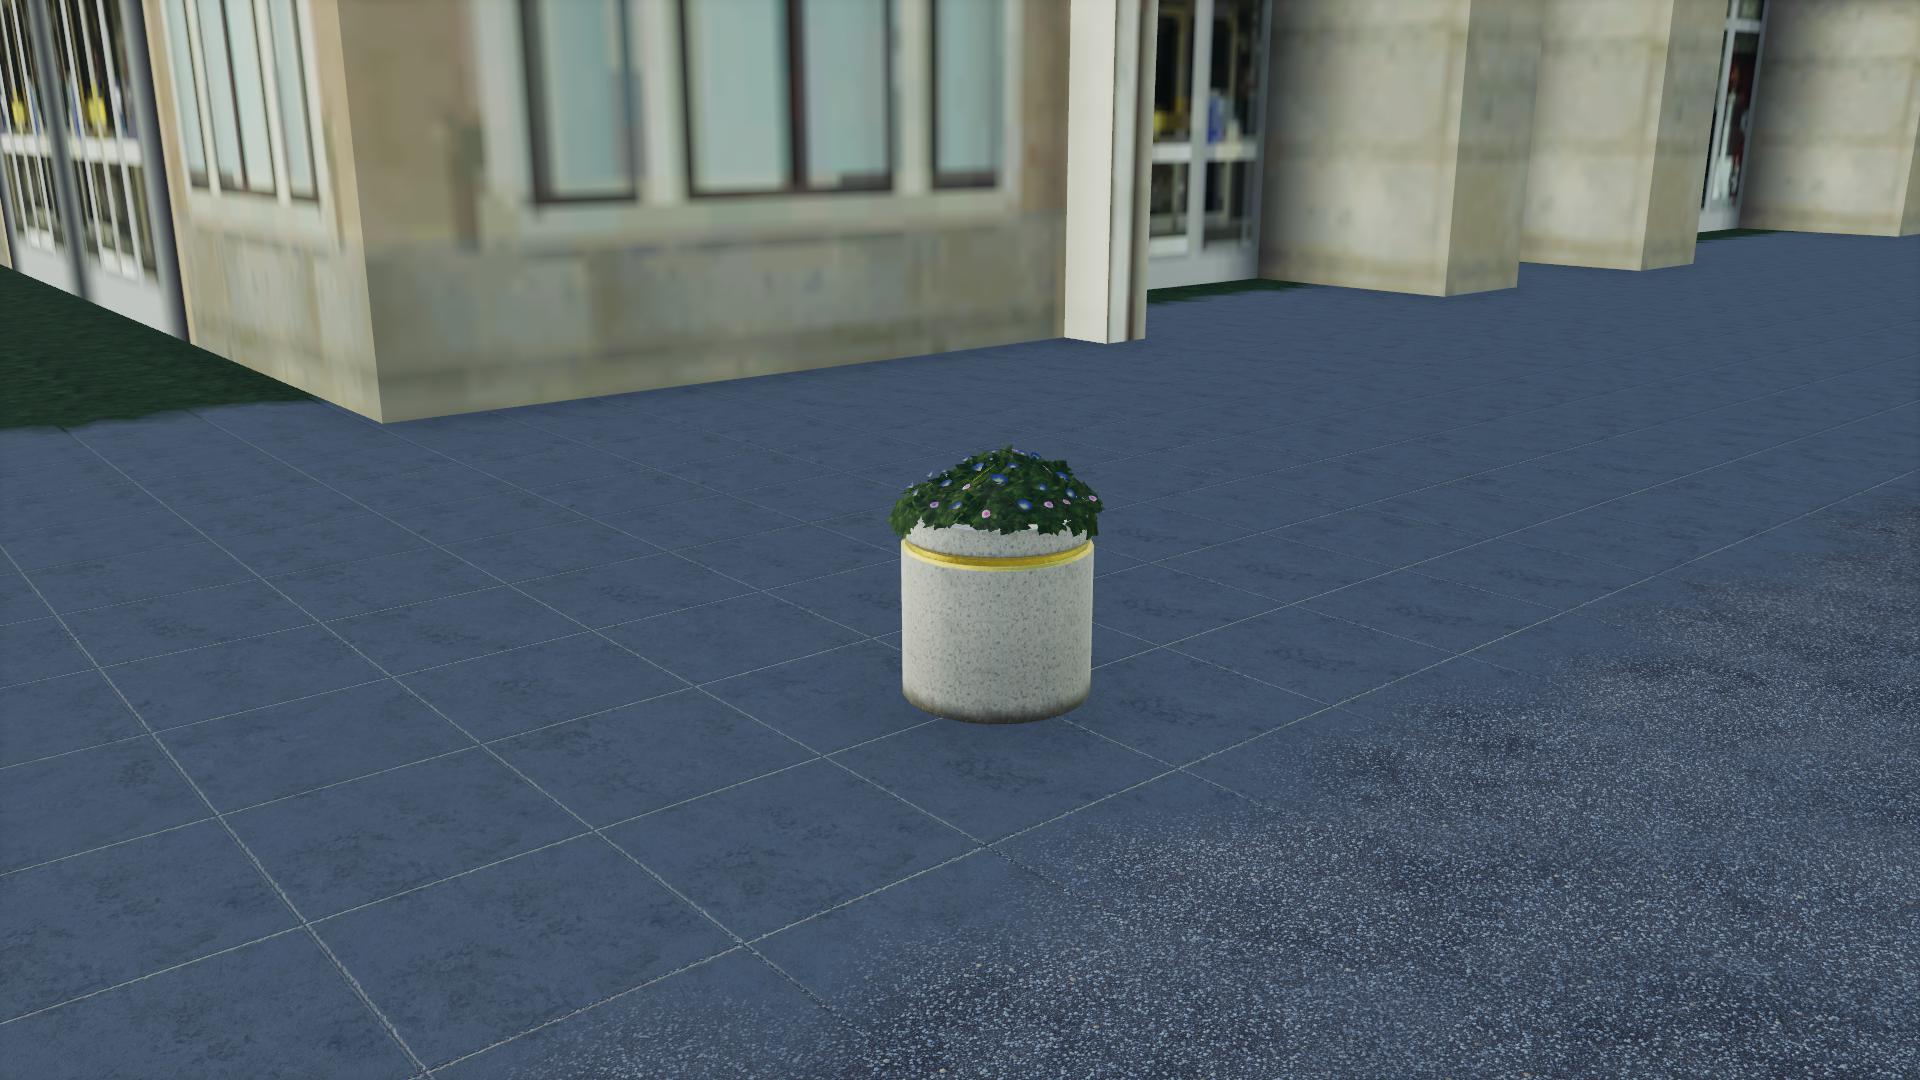 The Placeable Round Planter v1.0